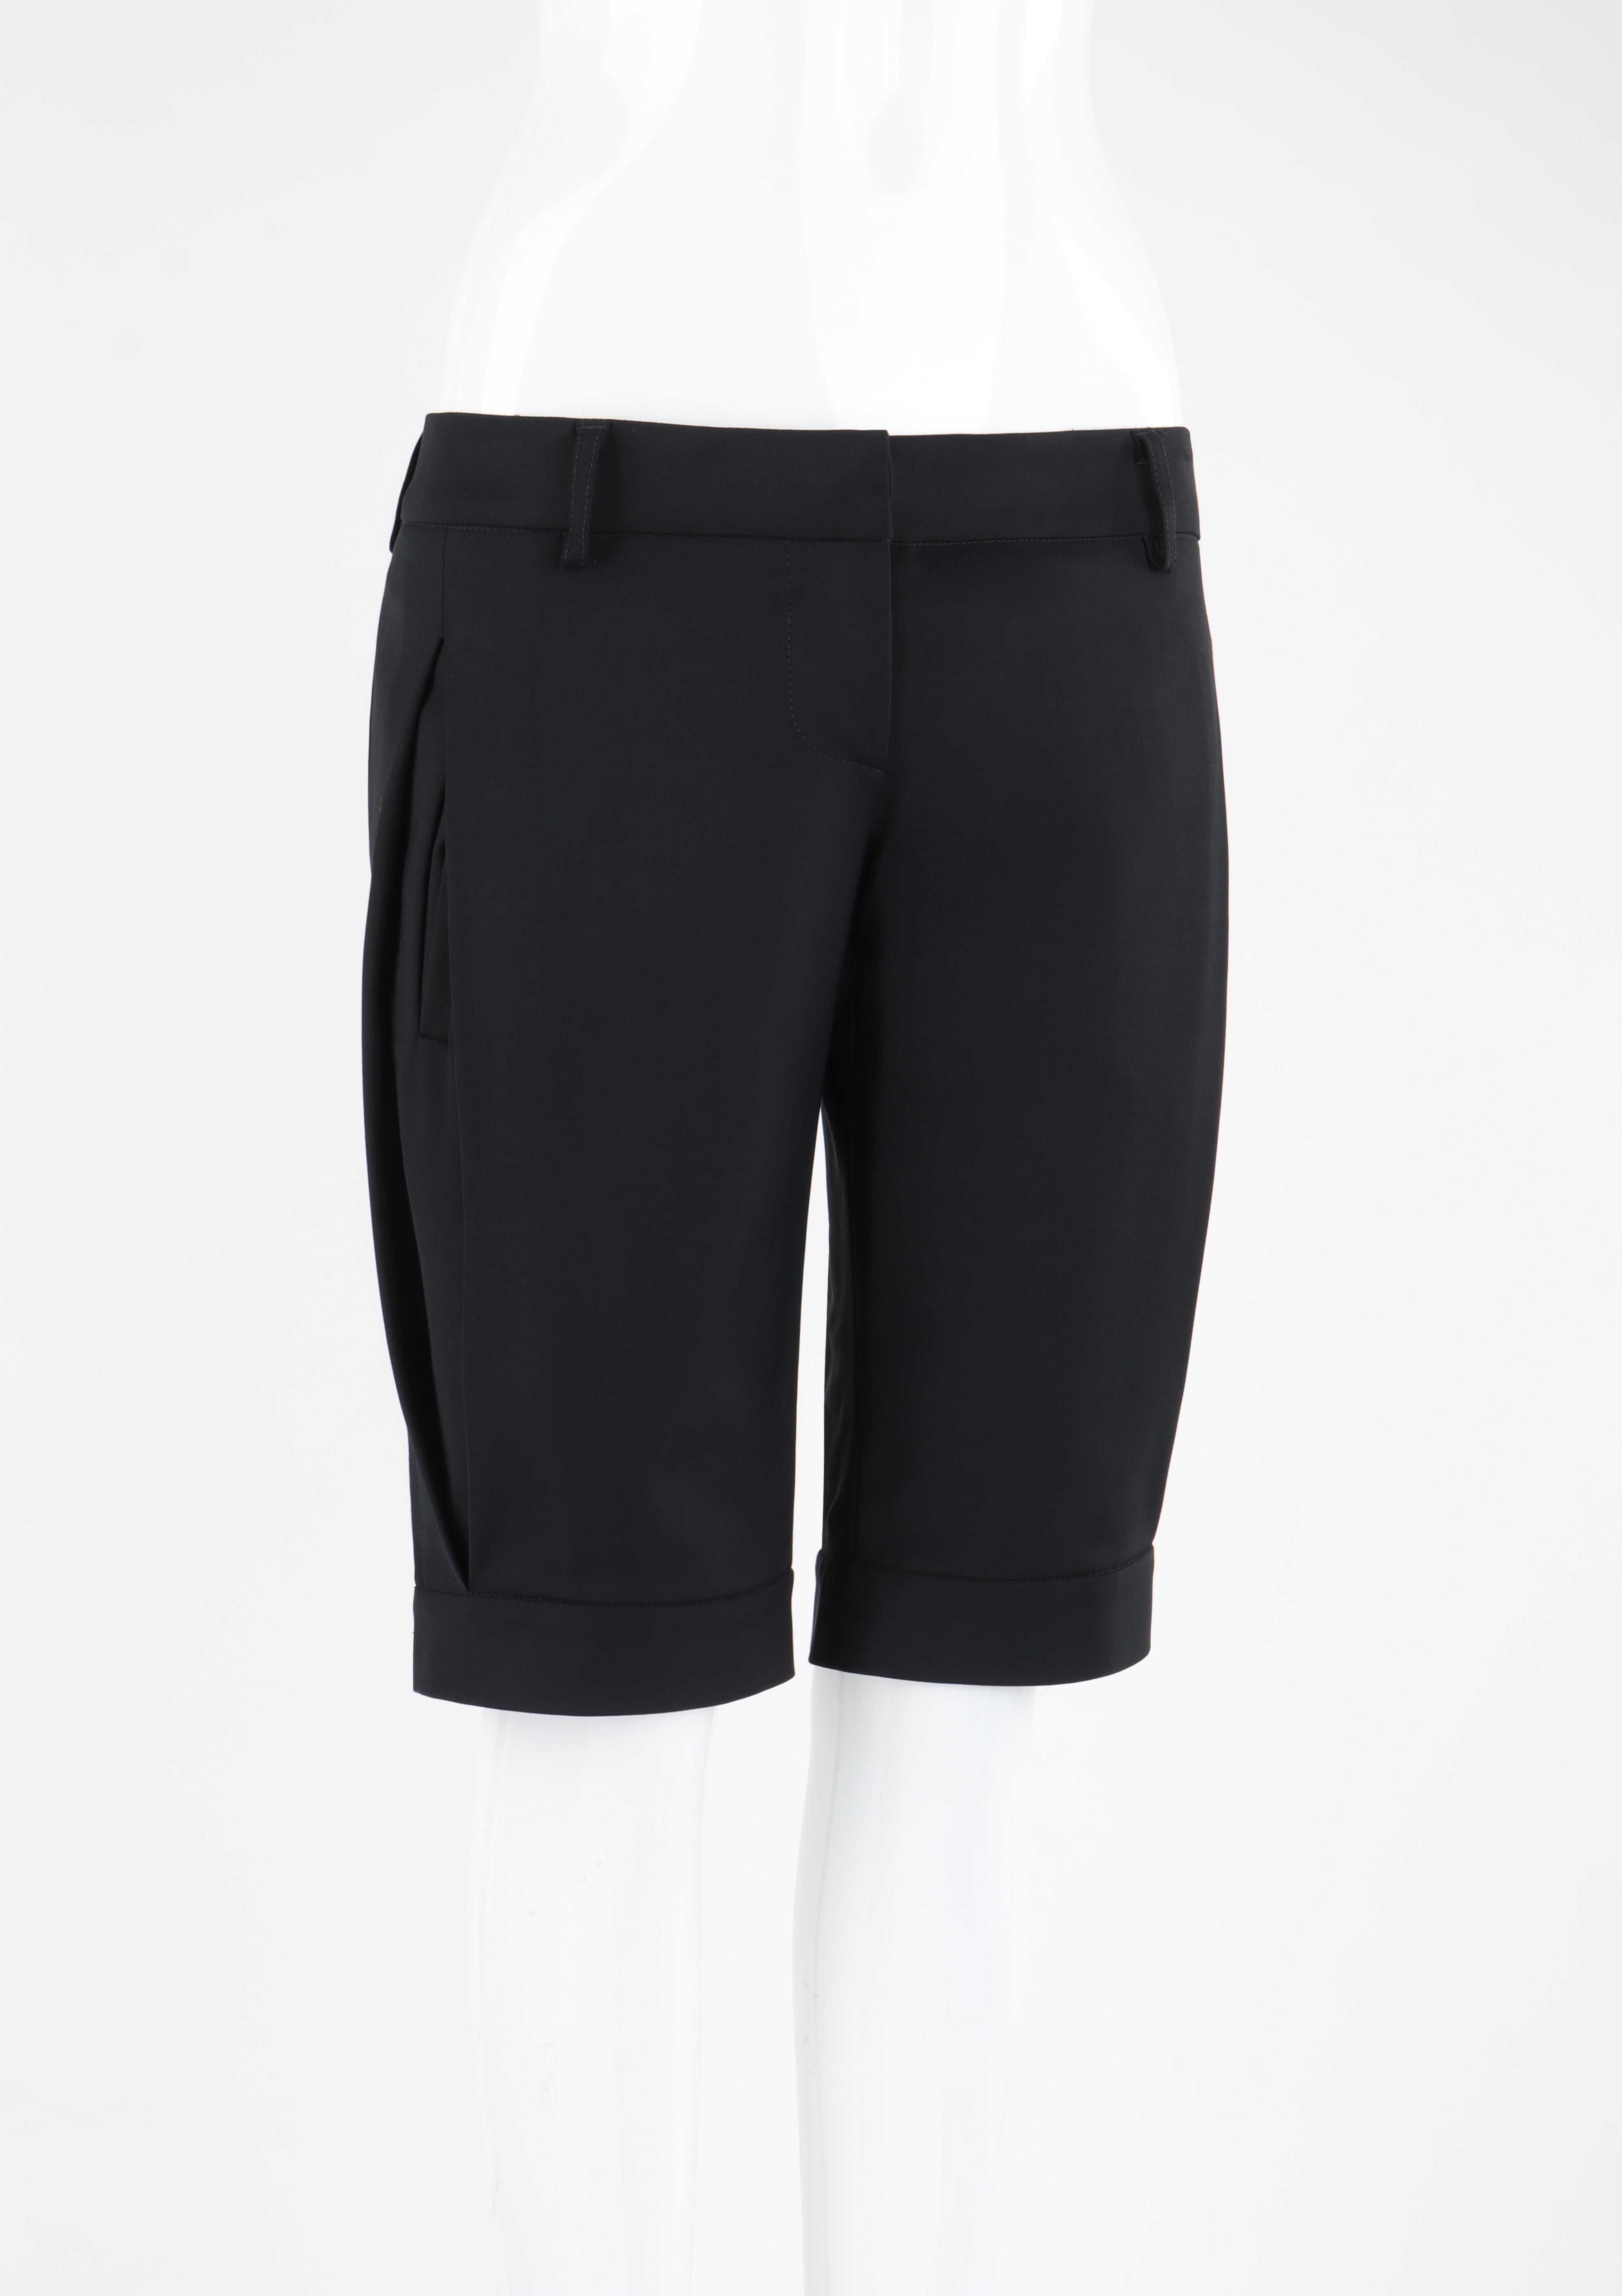 ALEXANDER McQUEEN S/S 1995 Black Stretch Welt Pocket Low-Rise Bermuda Shorts In Good Condition For Sale In Thiensville, WI